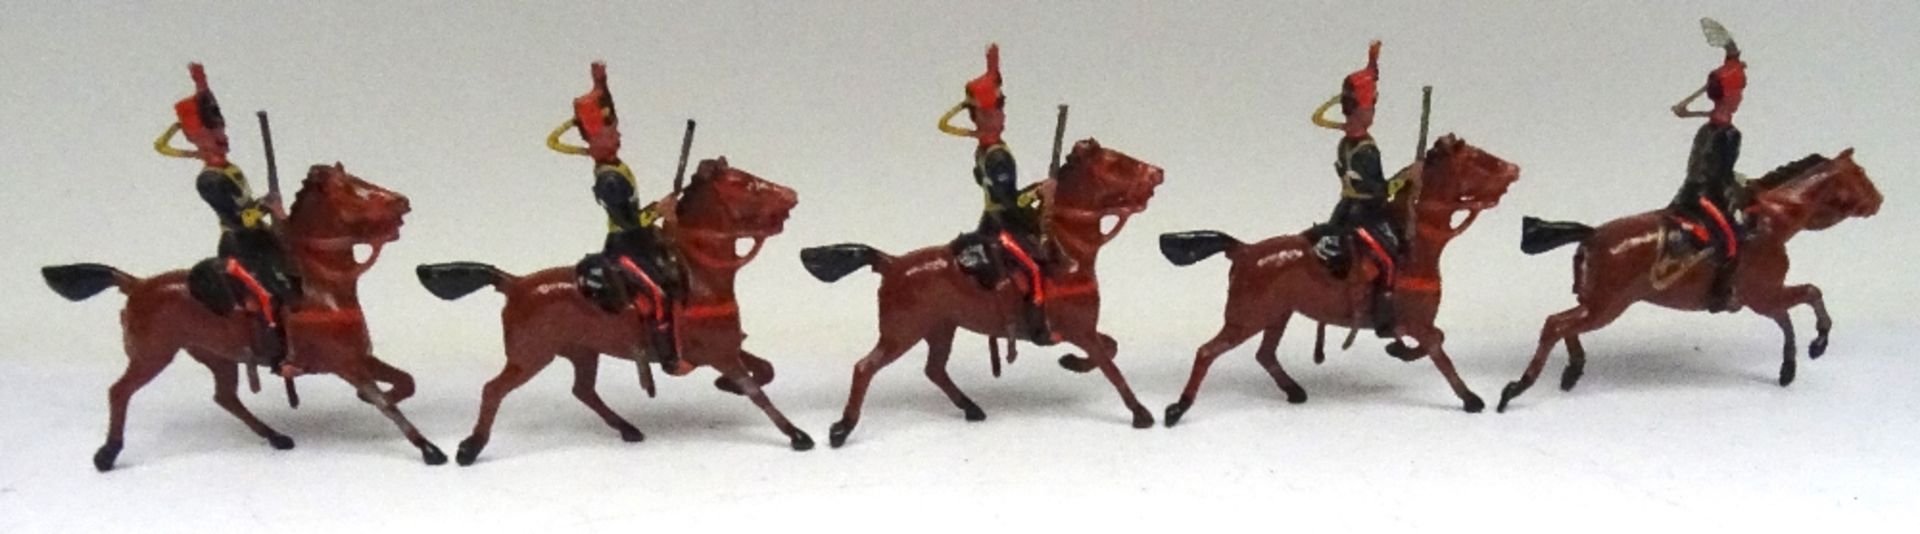 Britains Royal Horse Artillery from set 39 - Image 2 of 3